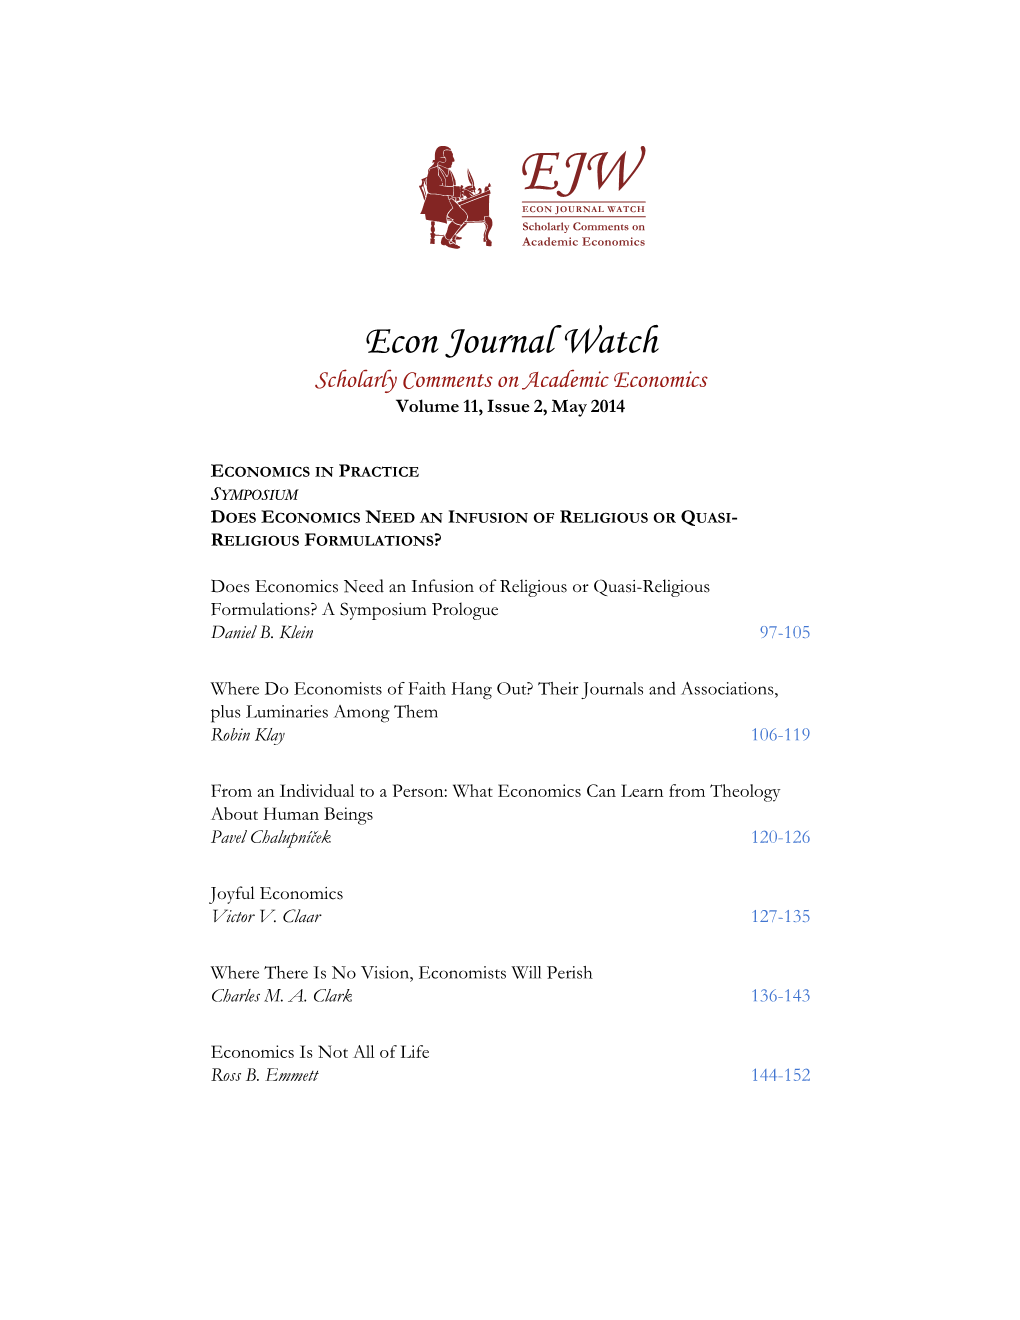 Econ Journal Watch 11(2), May 2014